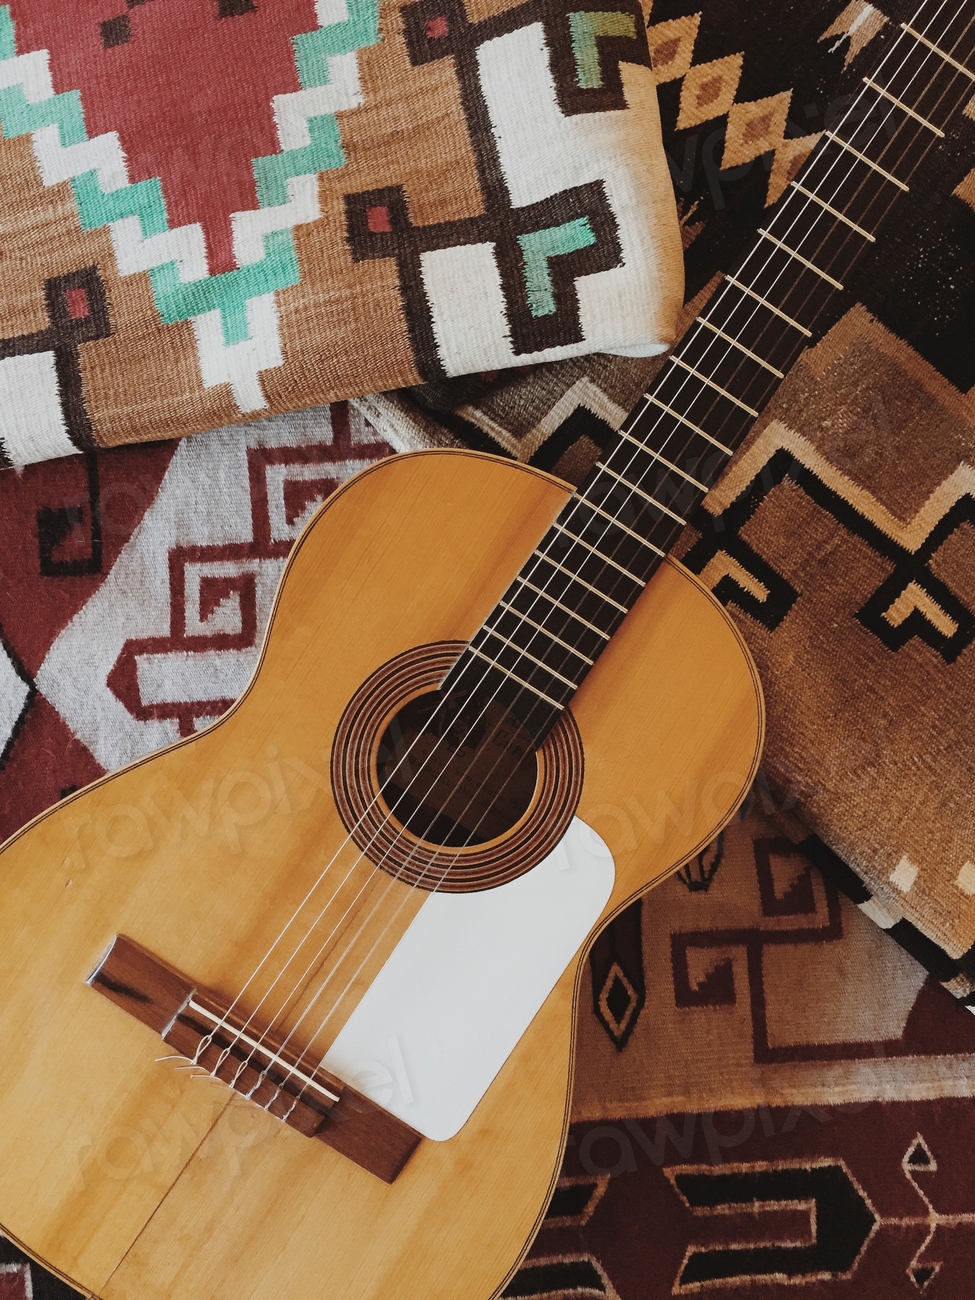 An acoustic guitar and tribal